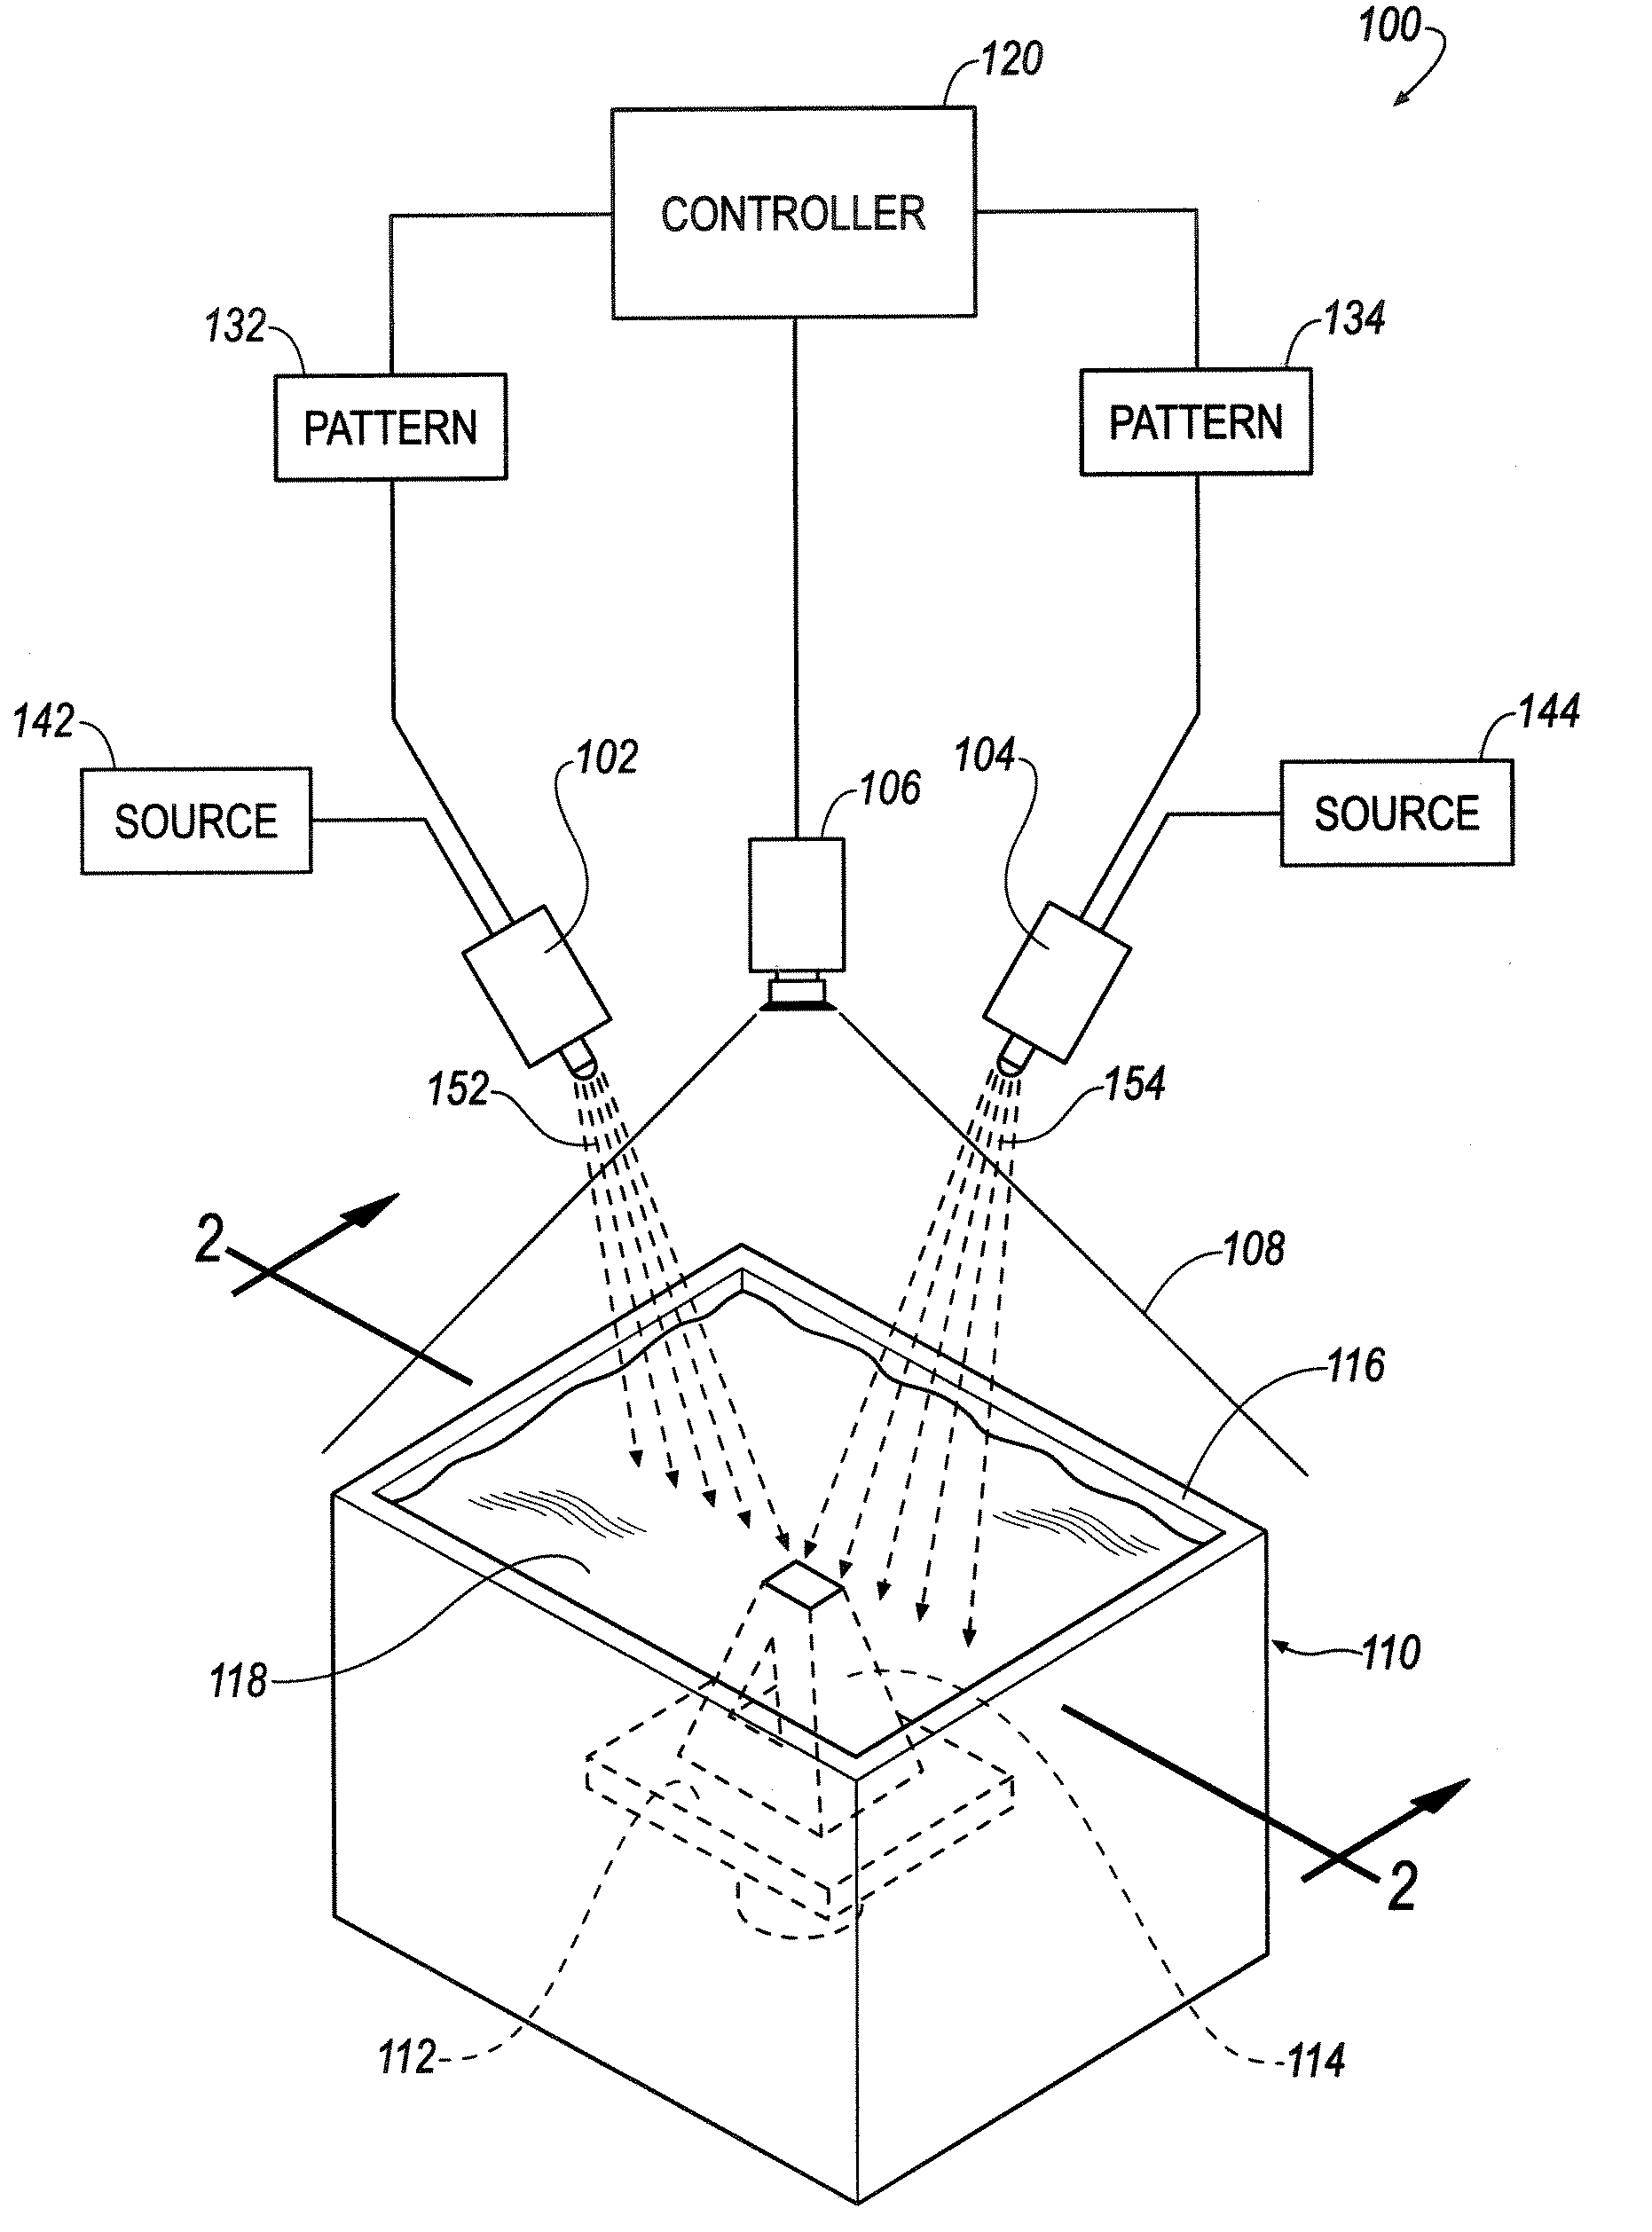 System and Method for Manufacturing